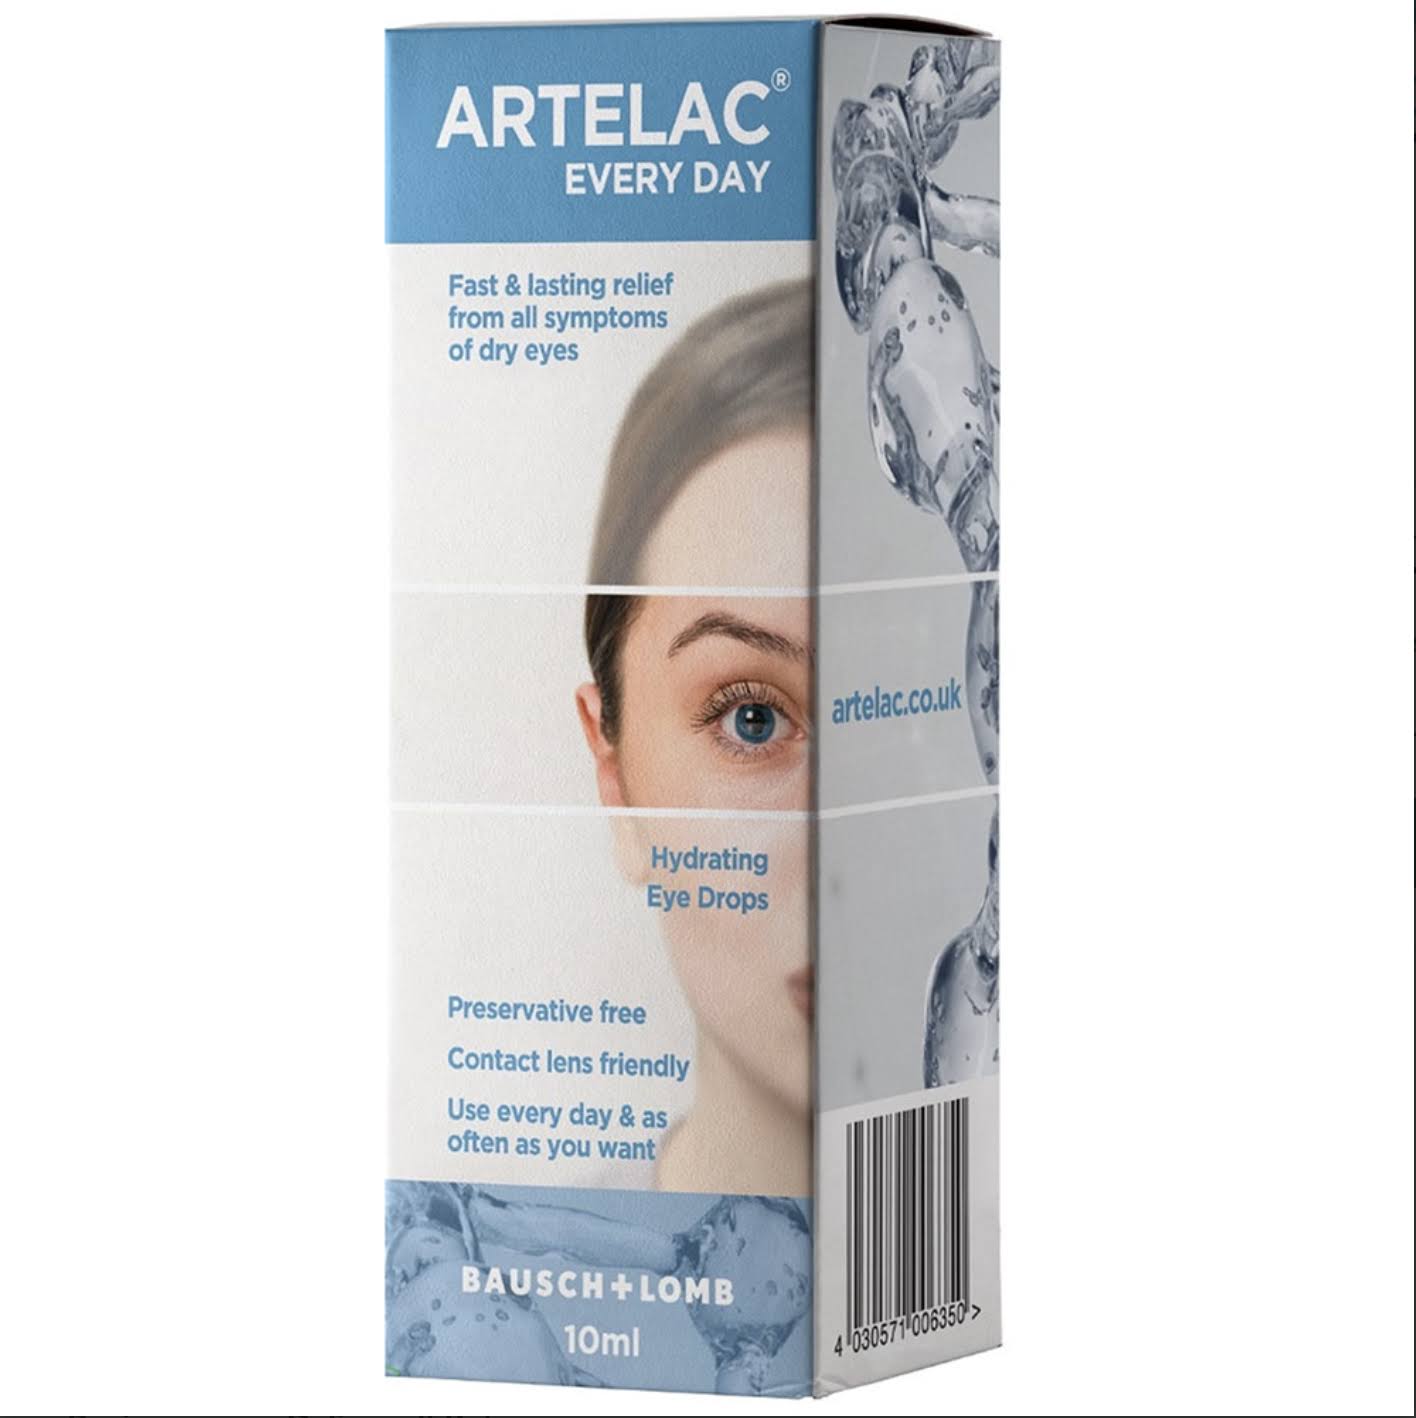 Artelac Every Day 10ml Eye Drops for Relief from All Dry Eye Symptoms